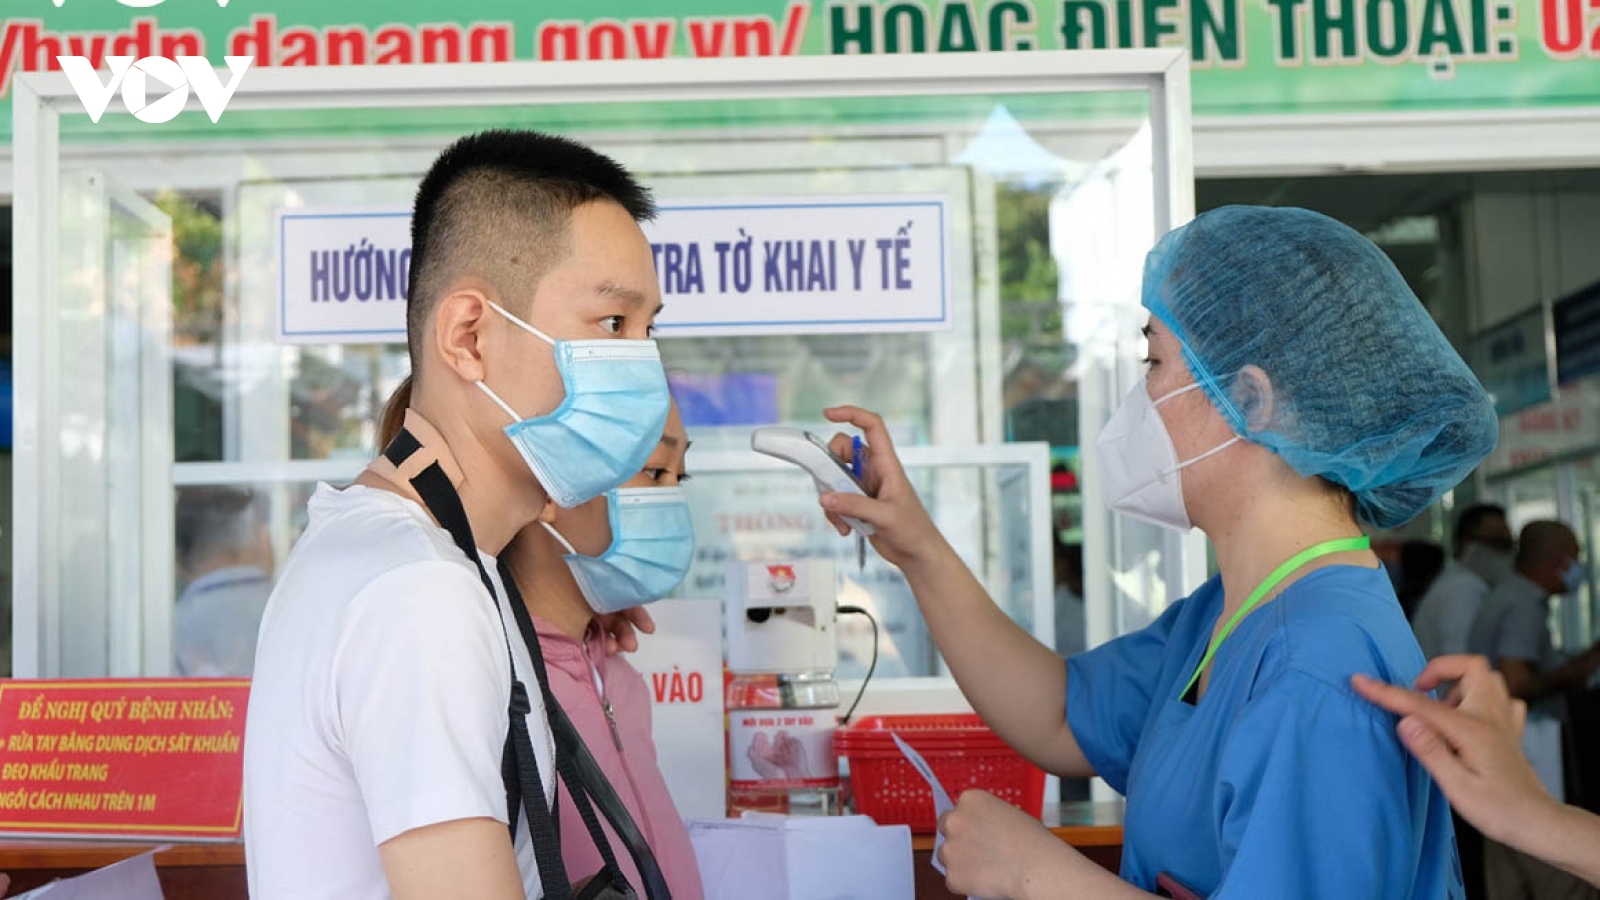 First day of re-opening sees crowds descend on Da Nang Hospital